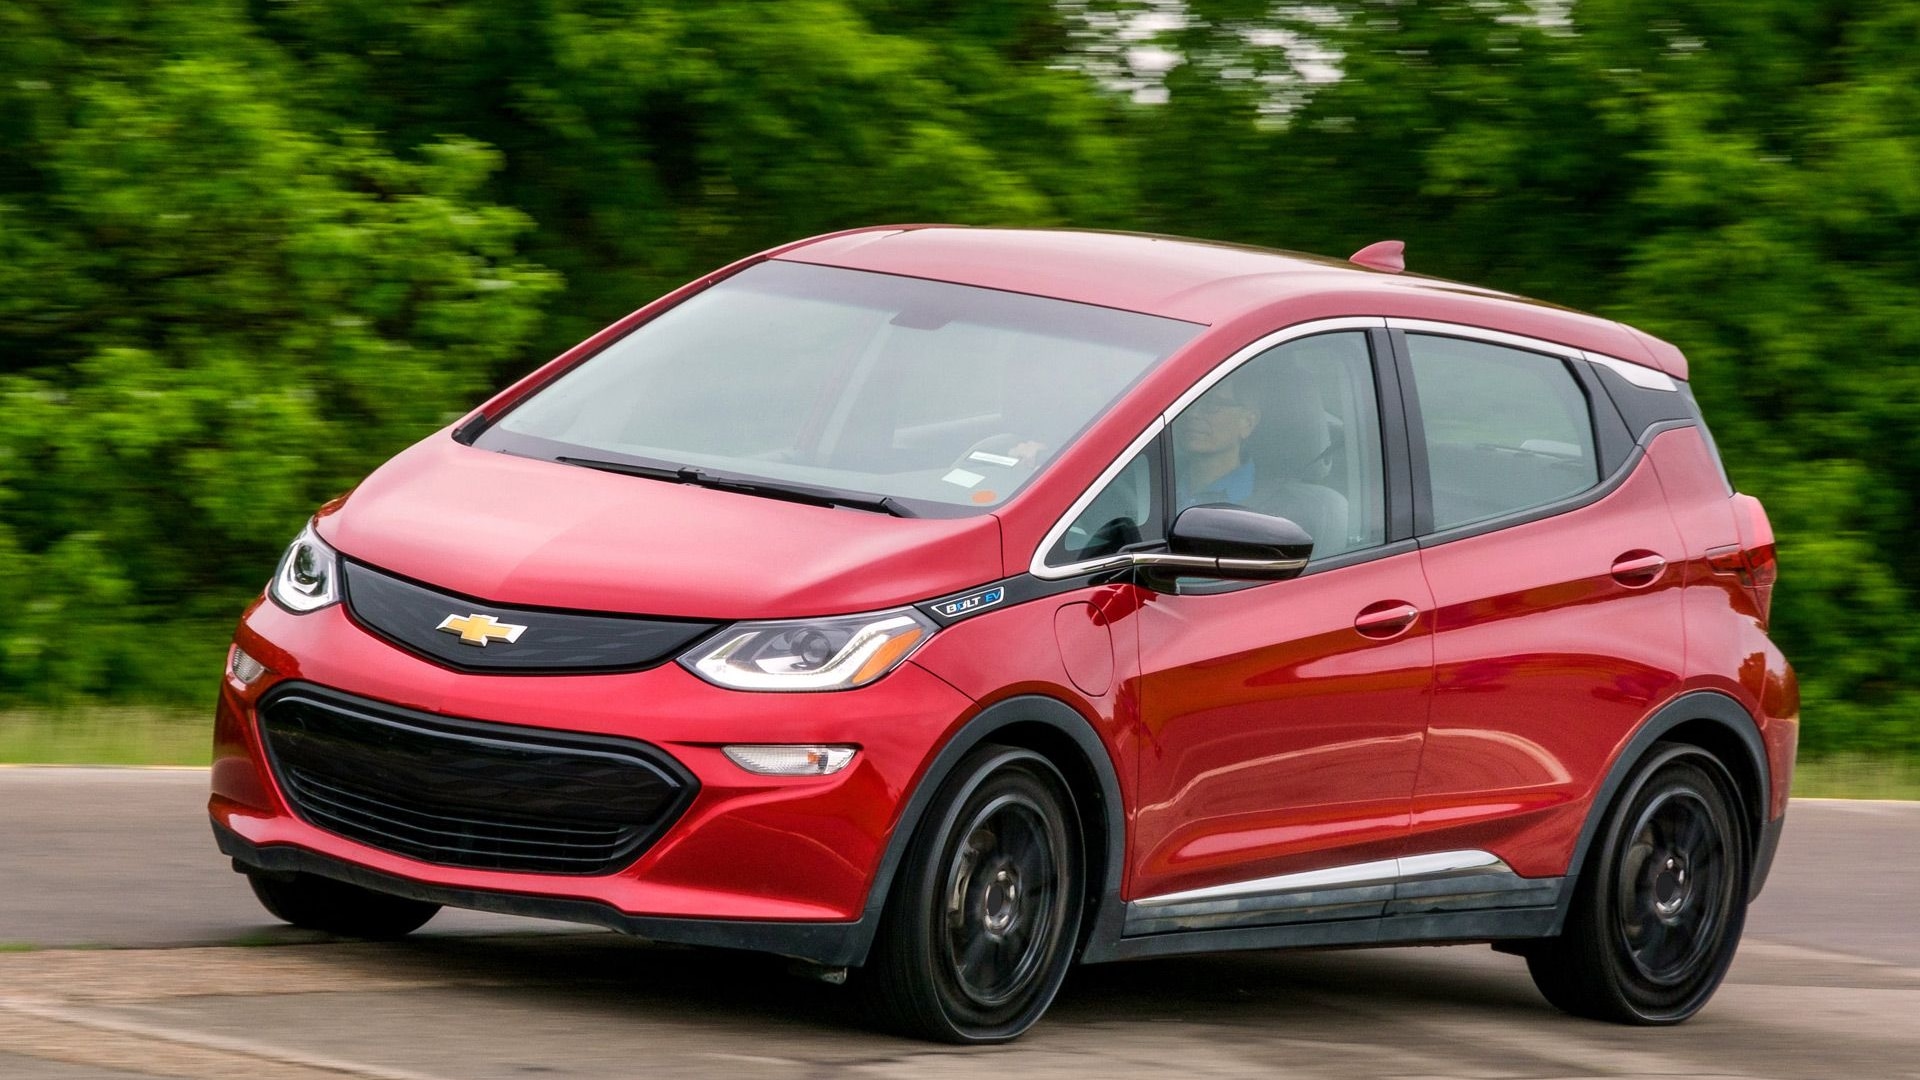 Chevrolet Bolt EV fitted with prototype airless tires from Michelin